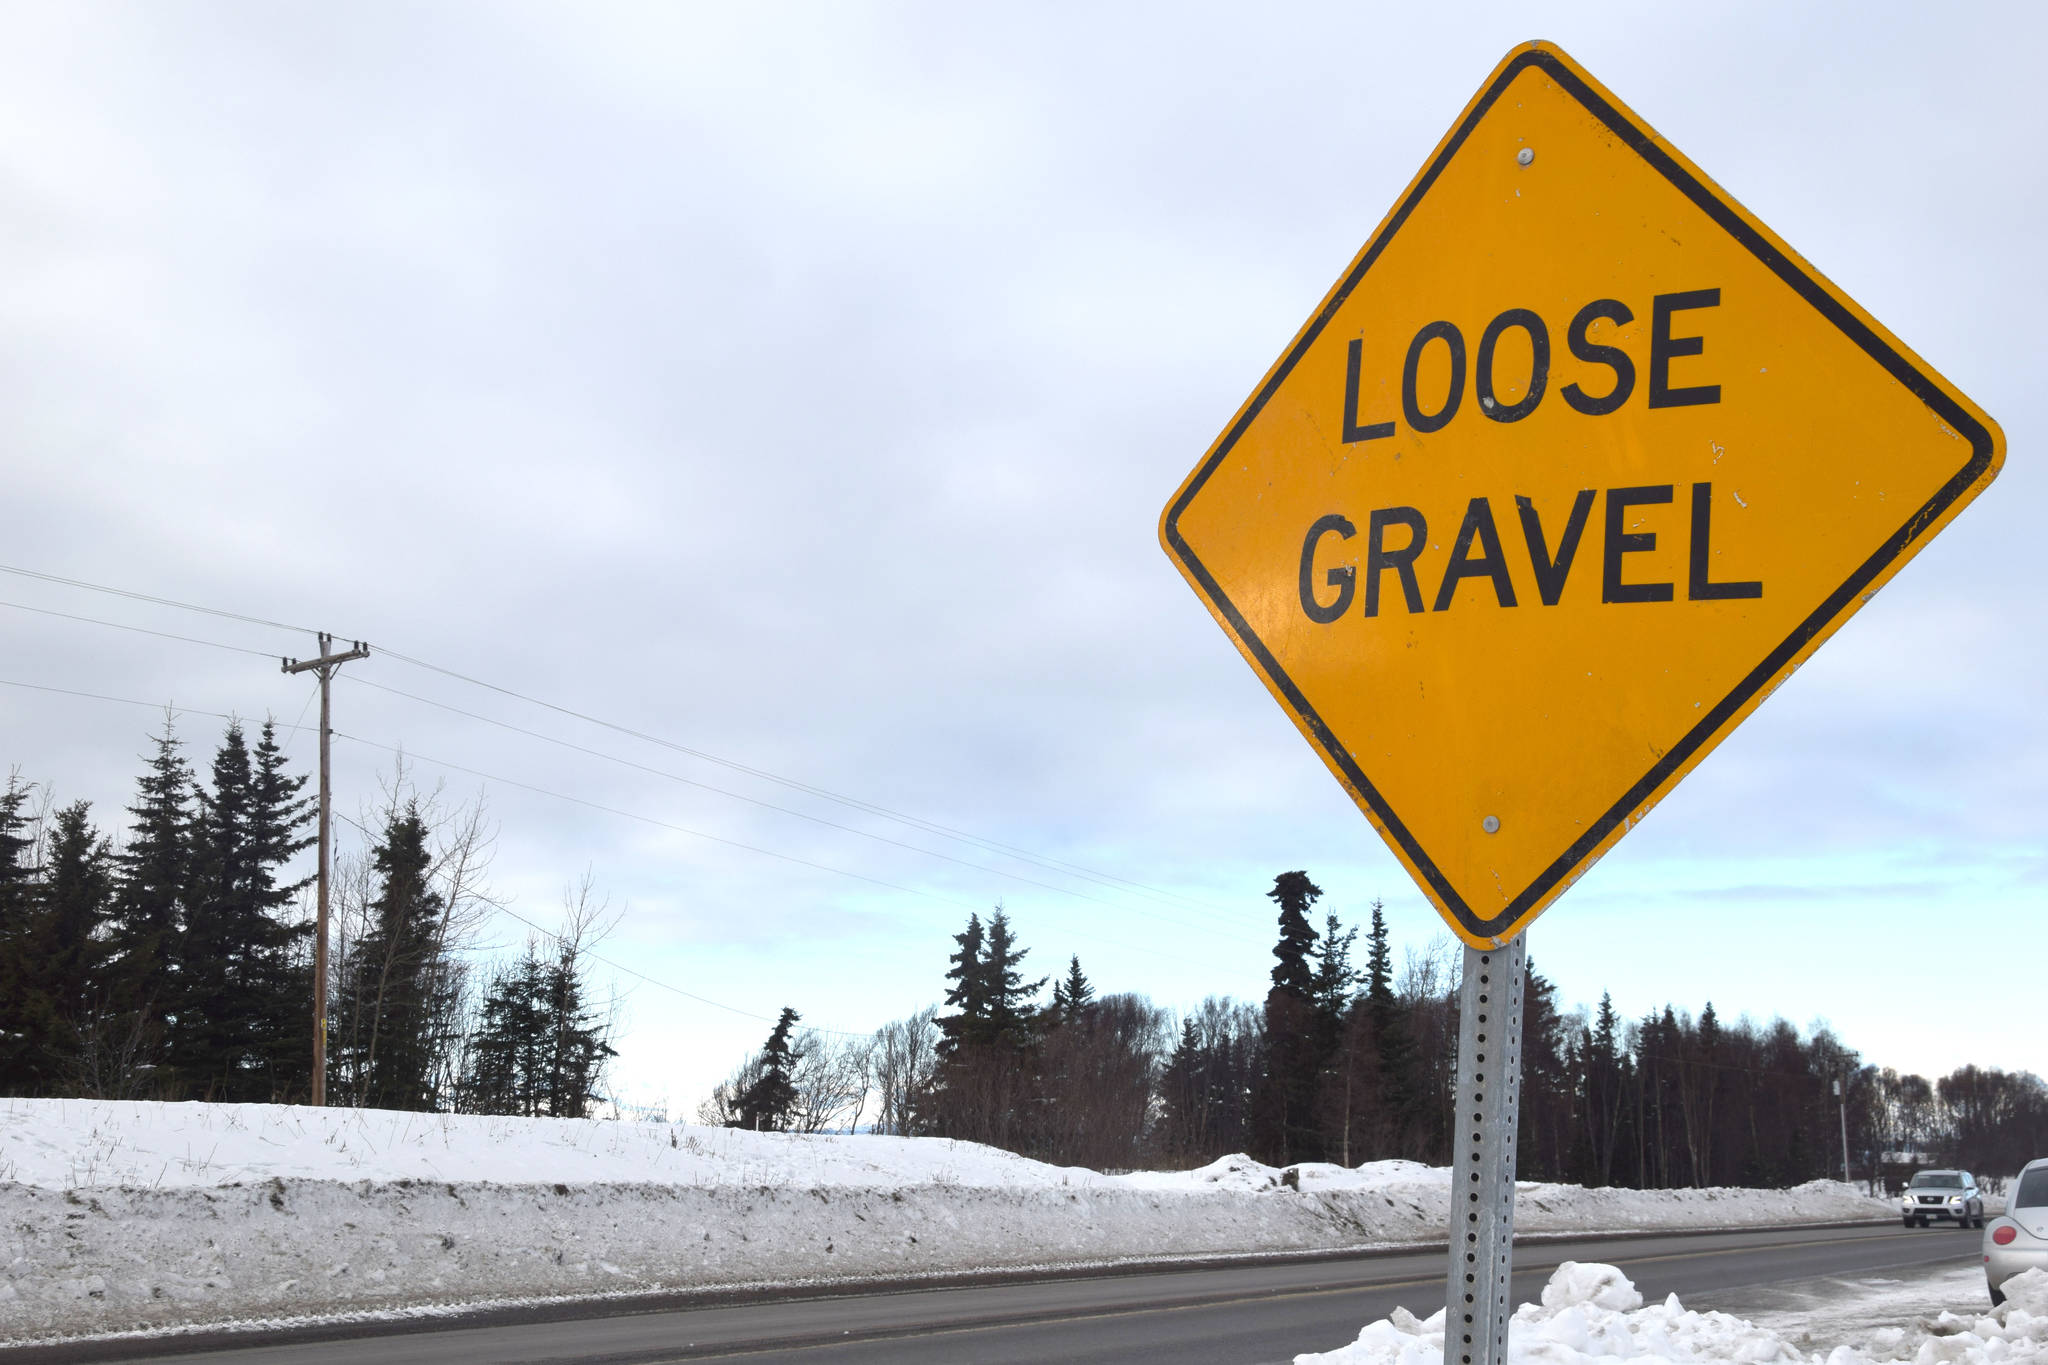 A sign along the Kenai Spur Highway warns drivers of damage ahead, as seen on Feb. 26, 2019. (Photo by Brian Mazurek/Peninsula Clarion)